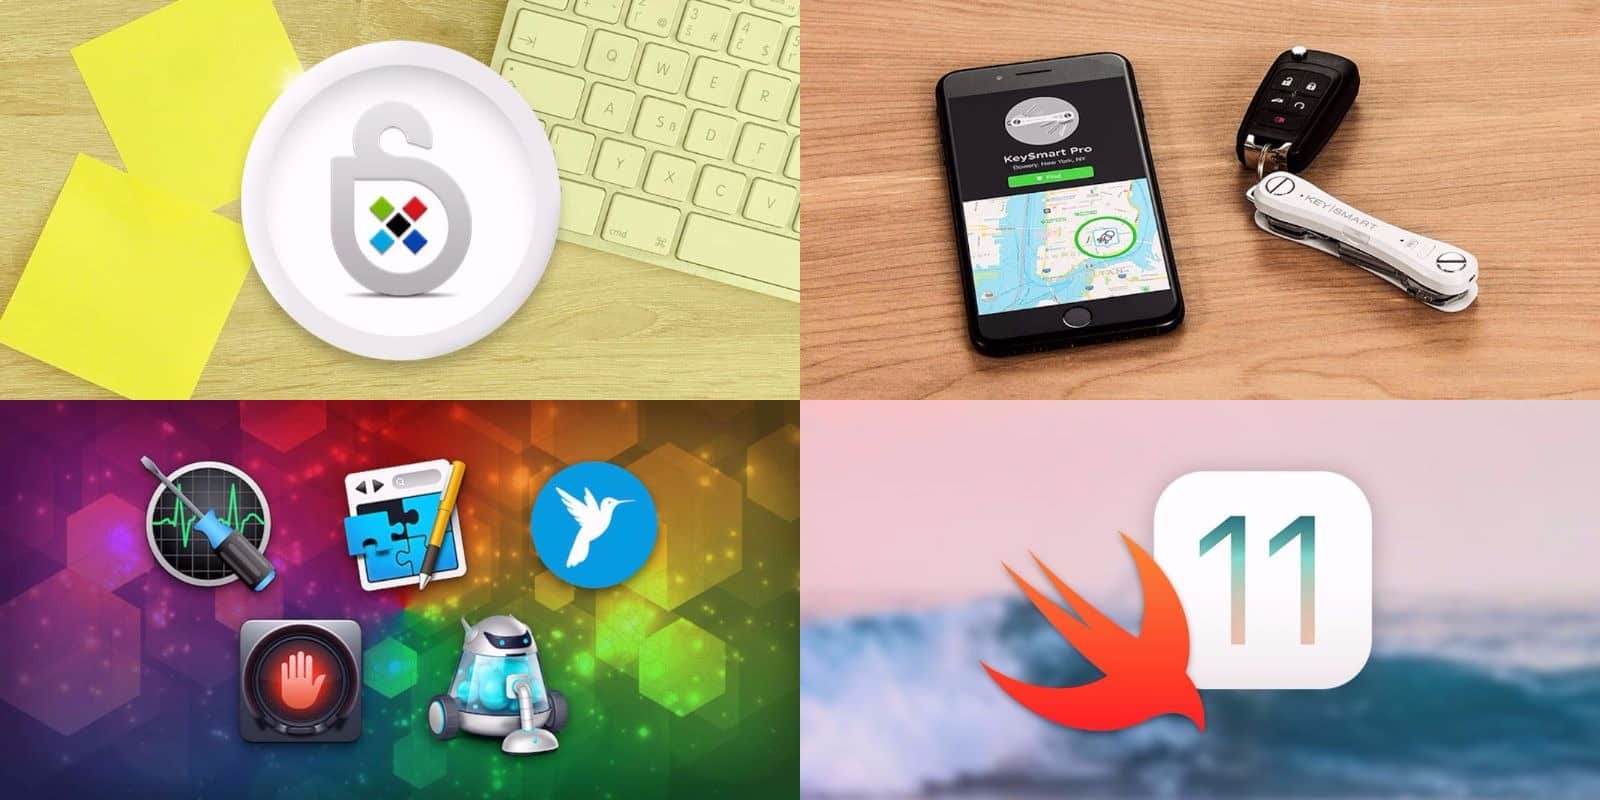 This week's best deals include a 21st century key keeper, top shelf apps, and more.